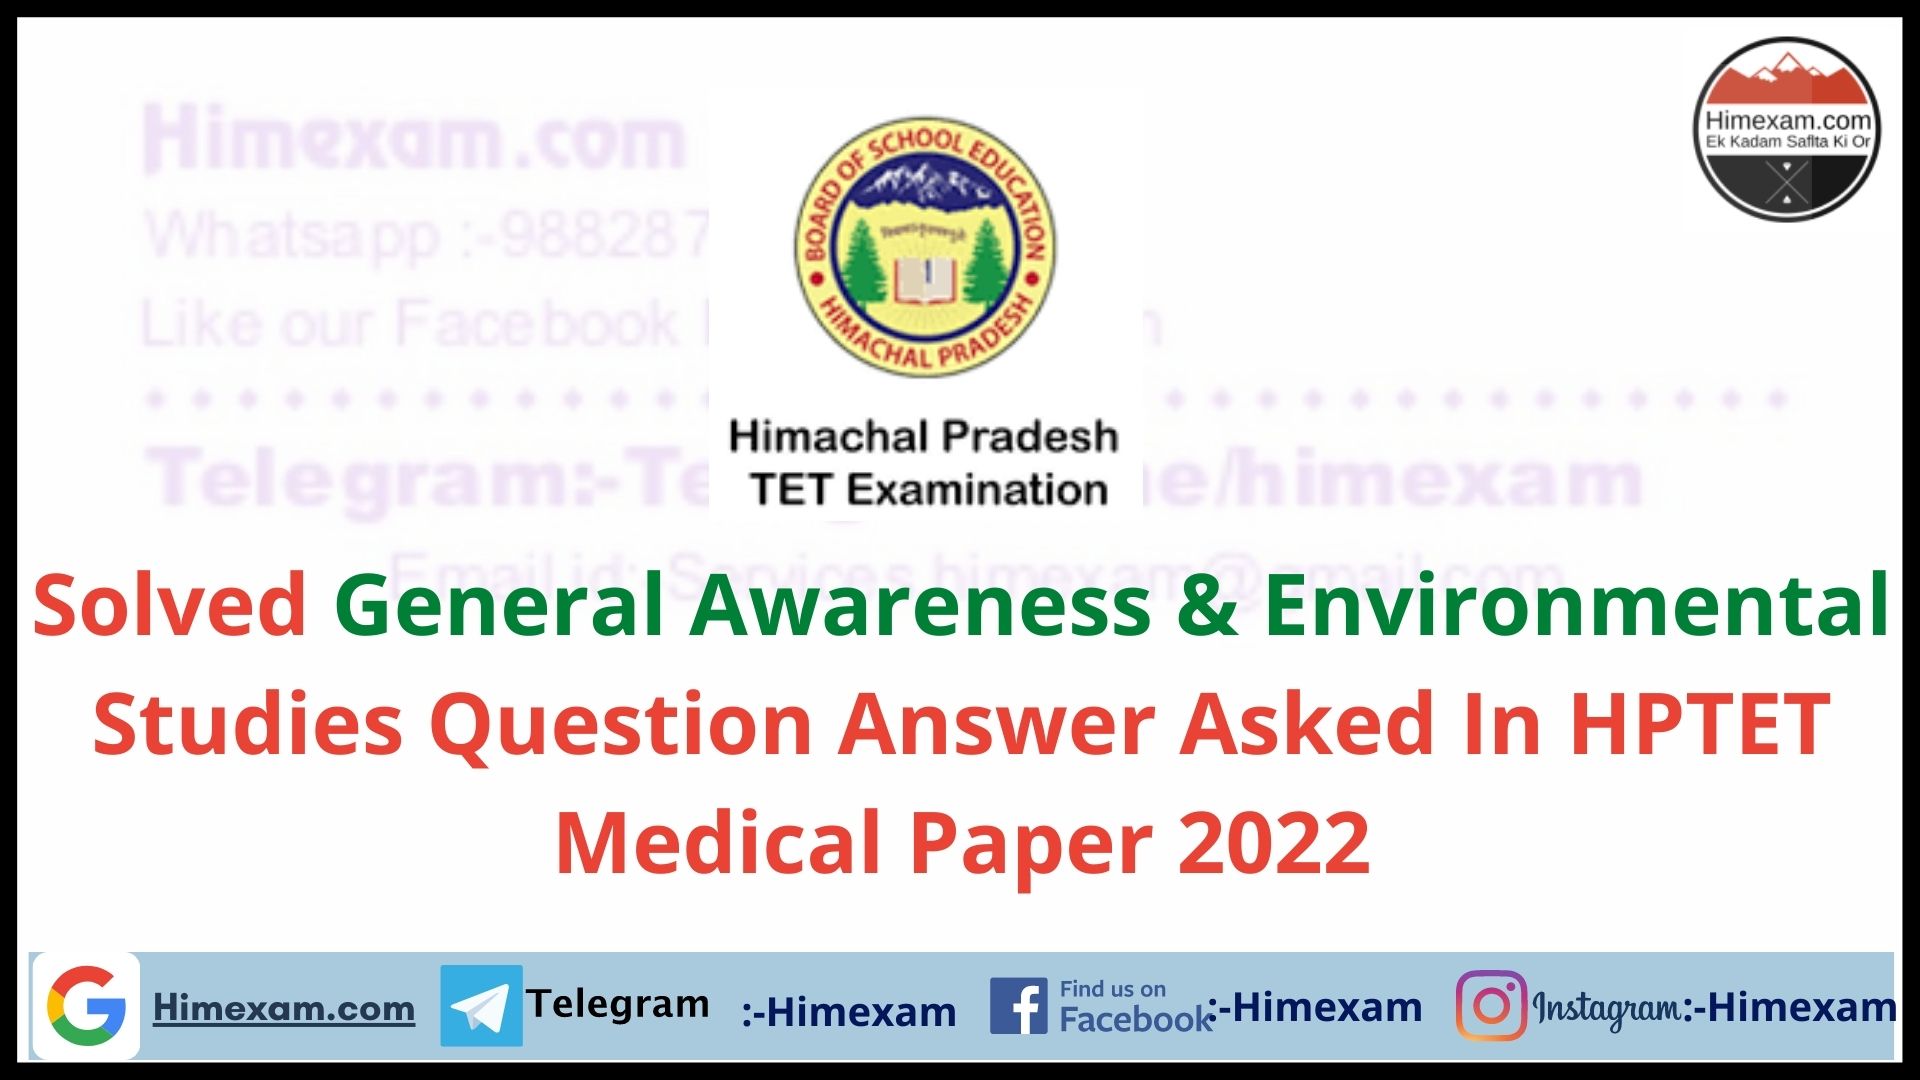 Solved General Awareness & Environmental Studies Question Answer Asked In HPTET Medical Paper 2022